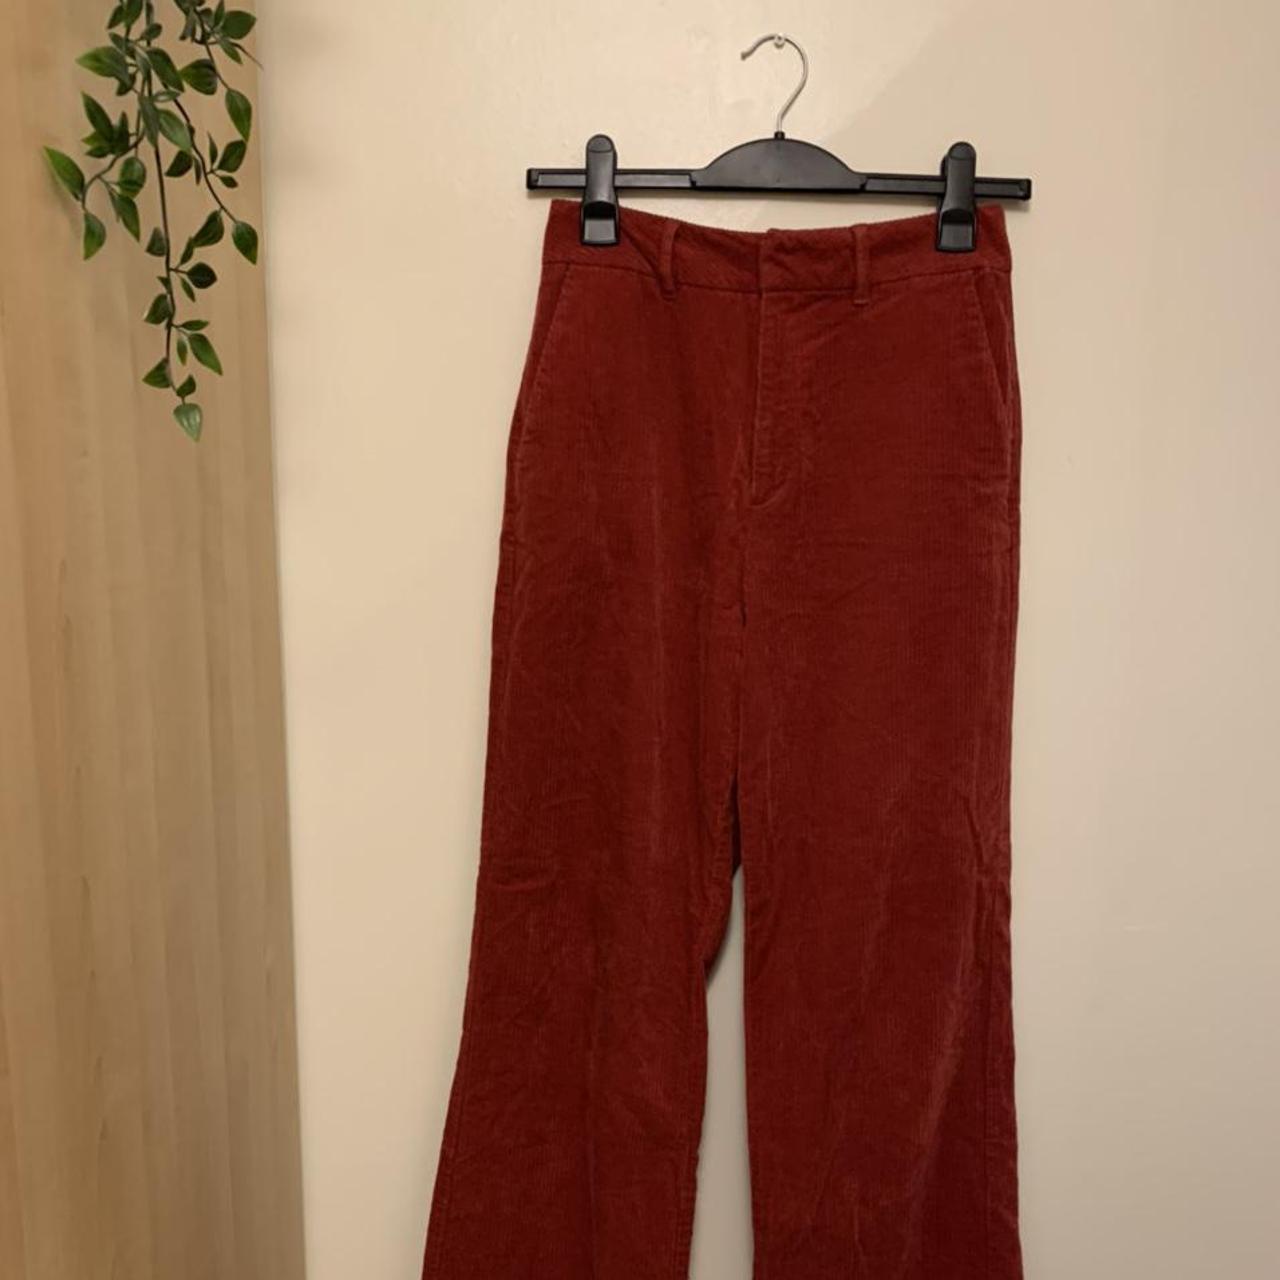 Insane 70s deep red corduroys - zip fly with double... - Depop